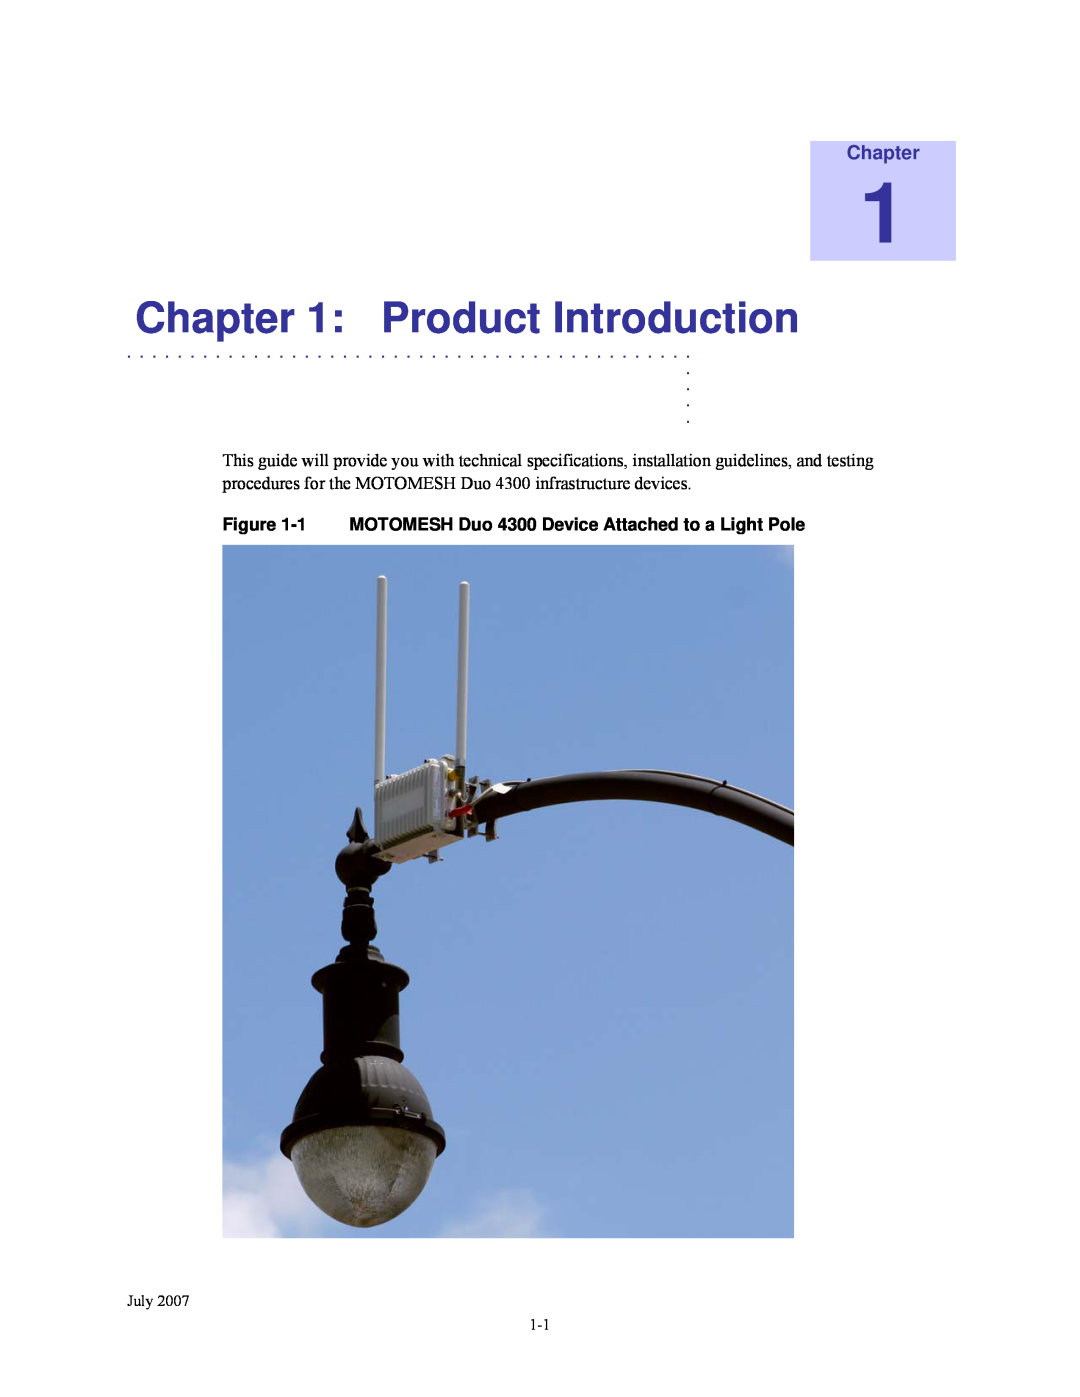 Nikon manual Product Introduction, Chapter, 1 MOTOMESH Duo 4300 Device Attached to a Light Pole 